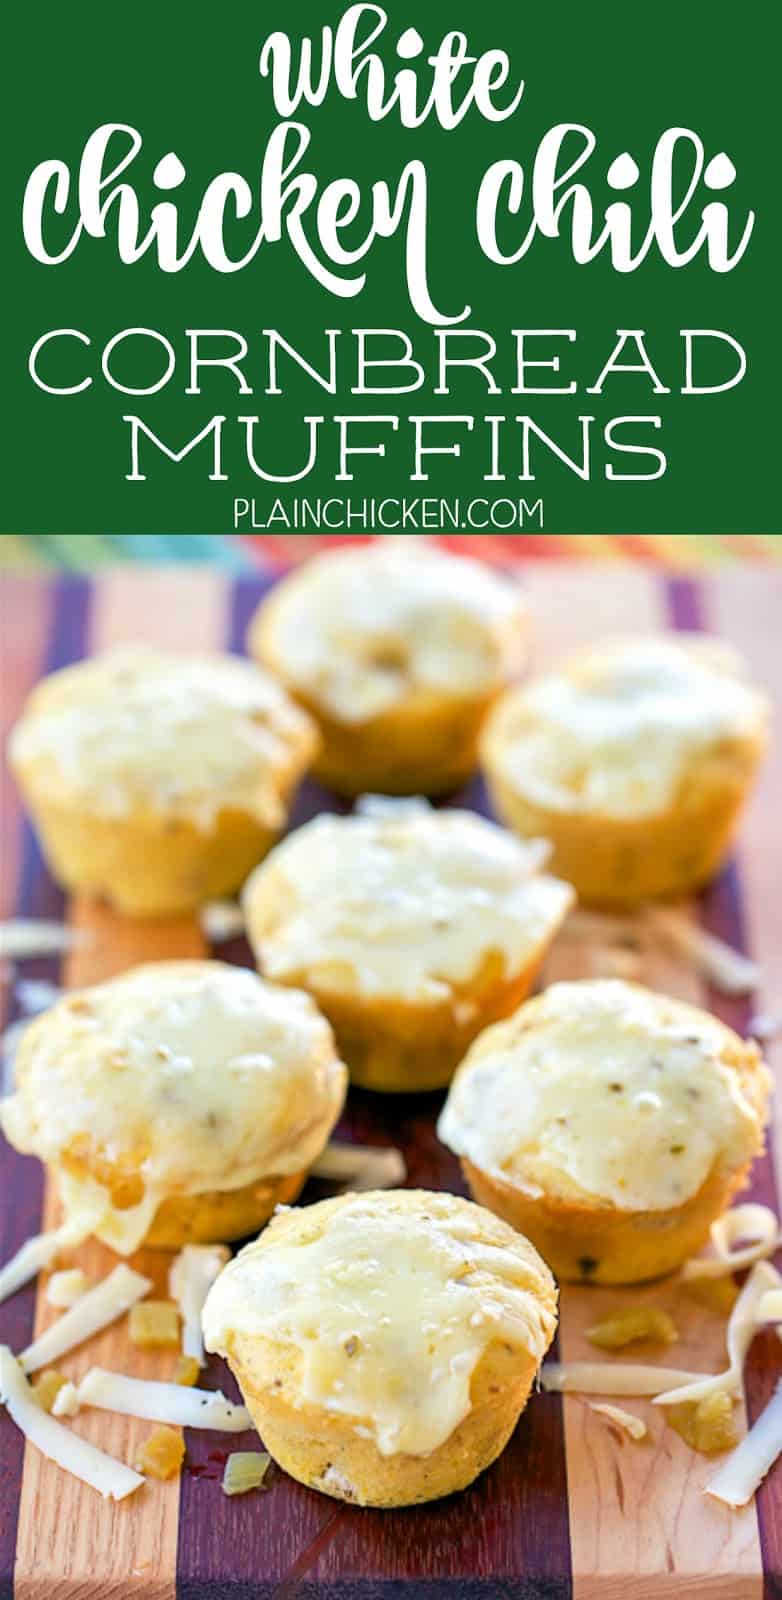 White Chicken Chili Cornbread Muffins - quick cornbread muffins stuffed with chicken, white beans, green chilies, cumin, garlic, oregano and pepper jack cheese. Everyone loved these muffins! Comfort food at its best! Great for lunch, dinner or tailgating. Ready in 20 minutes!!